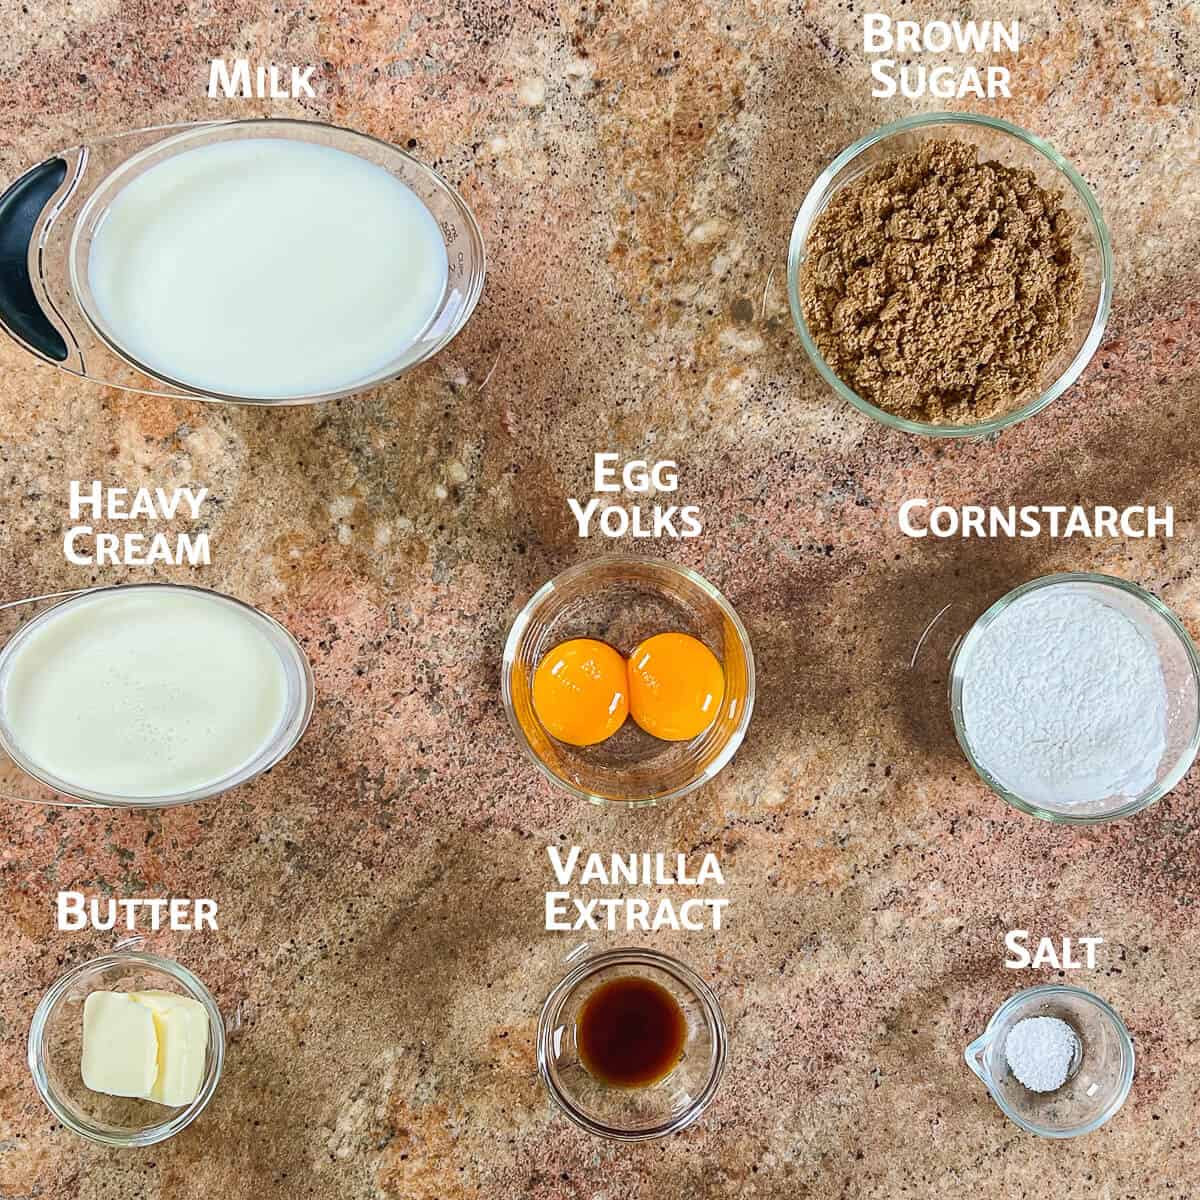 Ingredients for butterscotch pudding portioned into glass bowls.